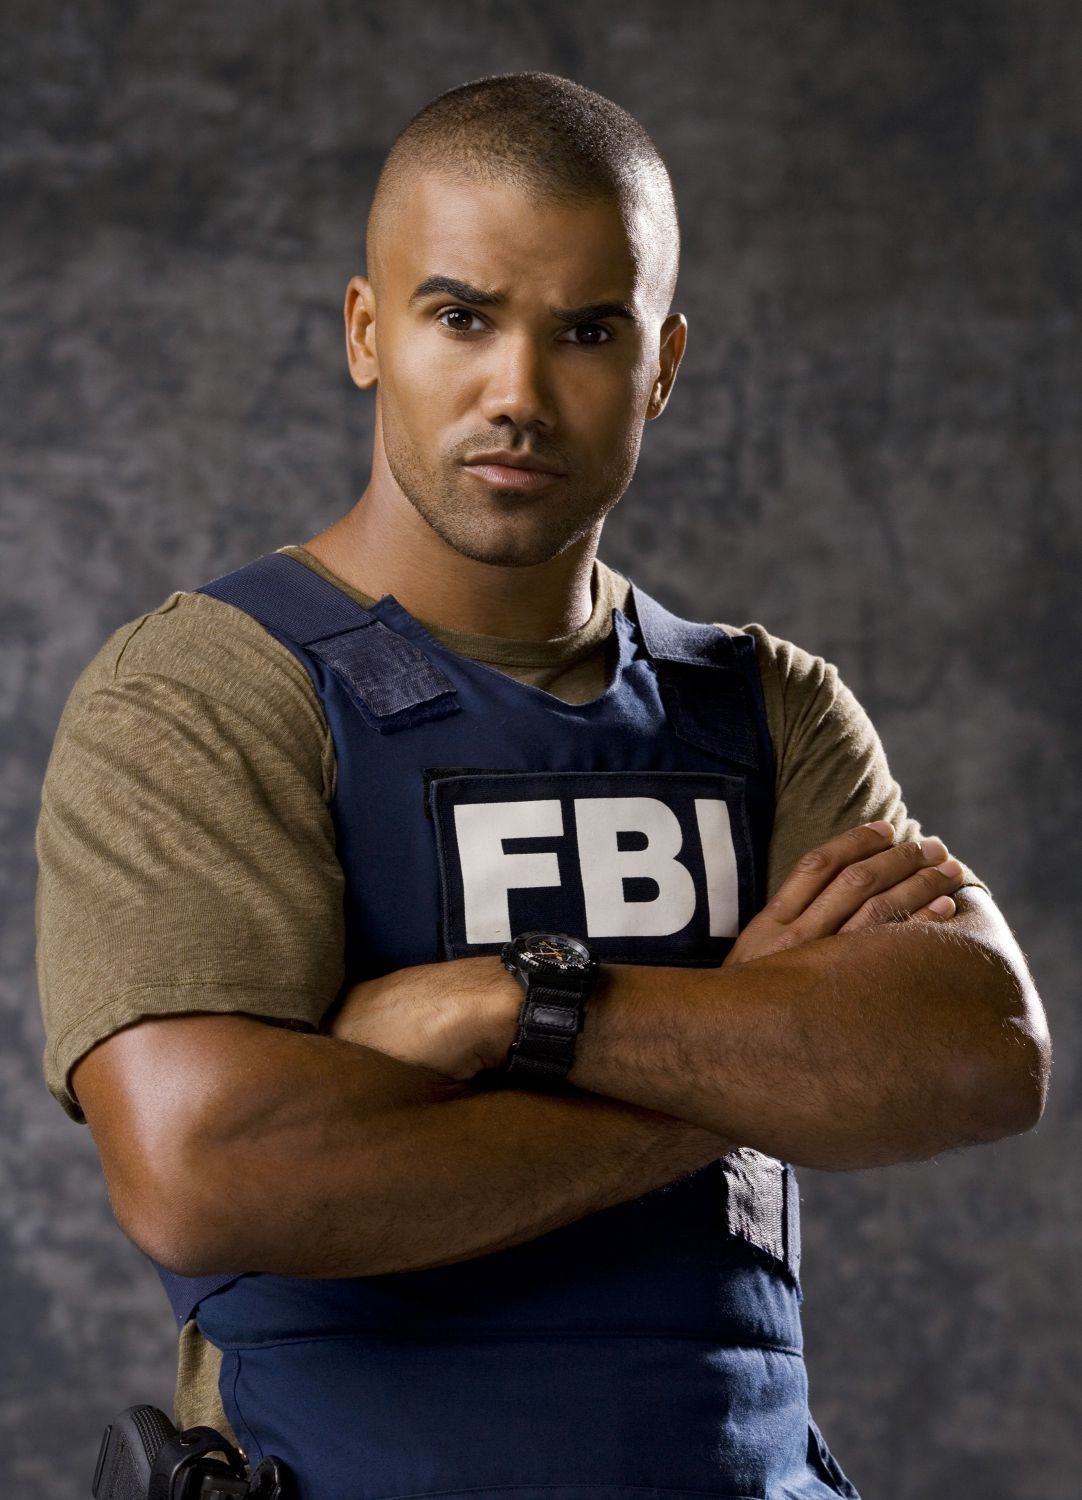 Happy Birthday to Shemar Moore, who turns 45 today! 